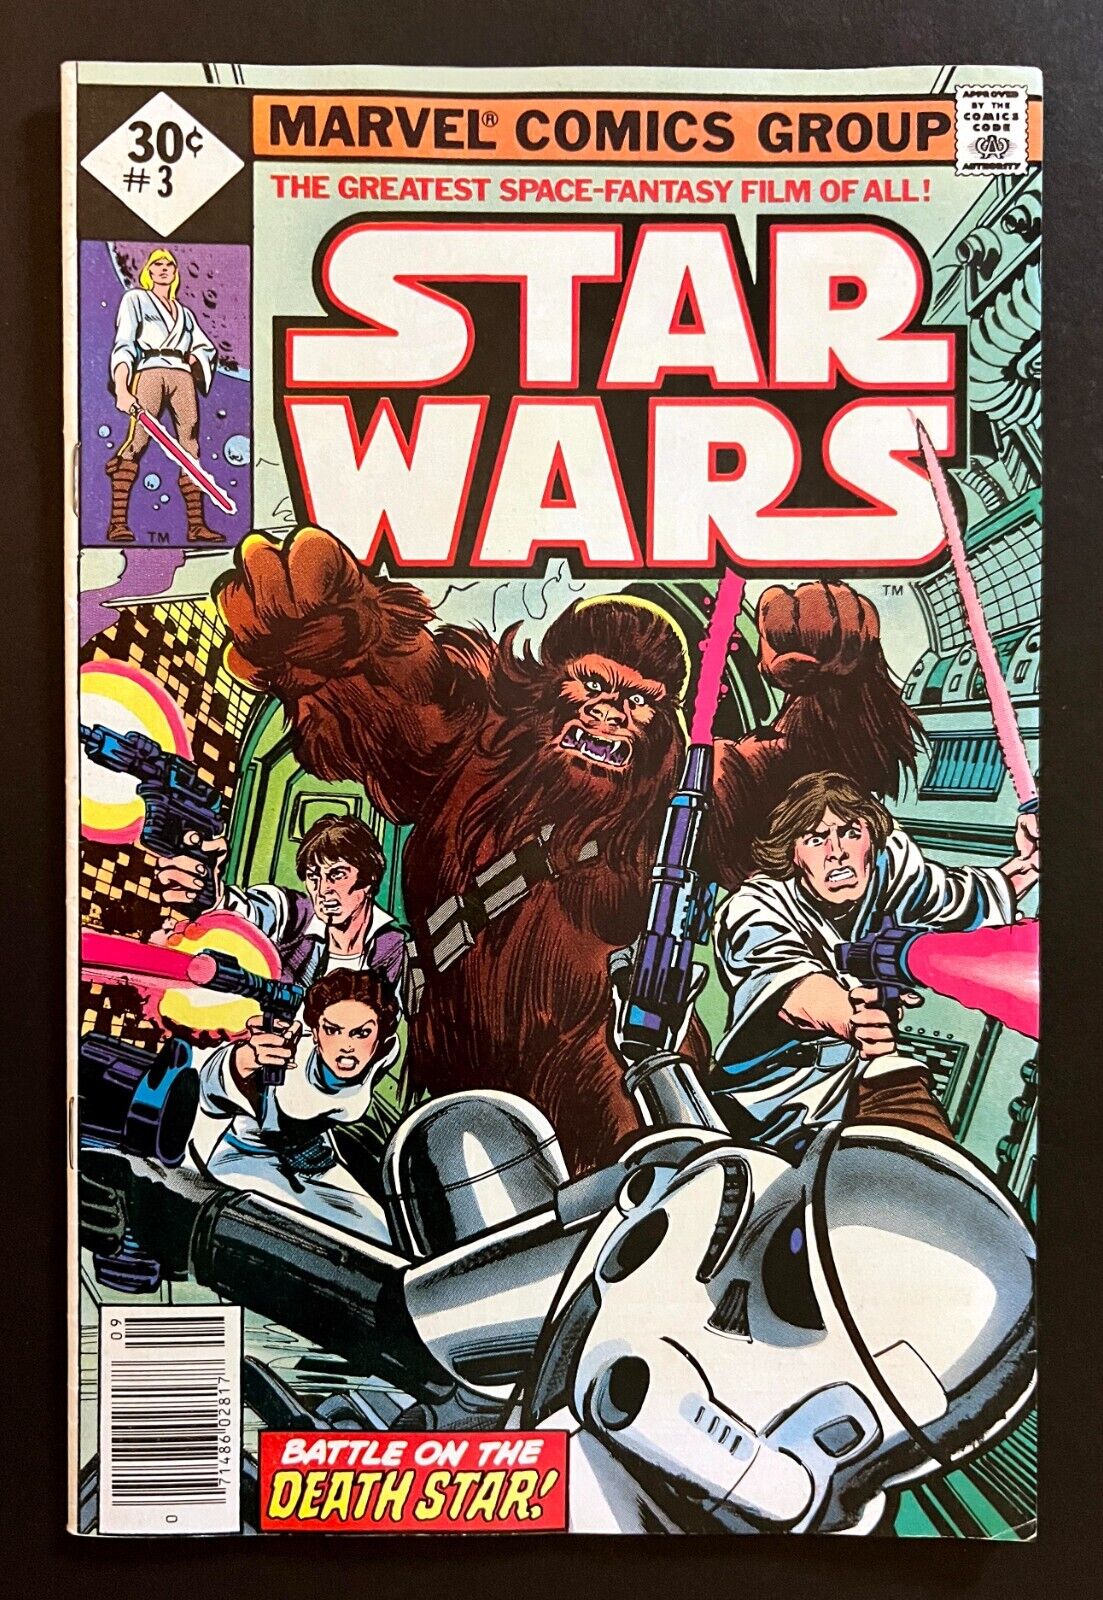 STAR WARS #3 Rare .30 Cent 1st Print Multi-Pack Variant 1st Han Solo Cover 1977